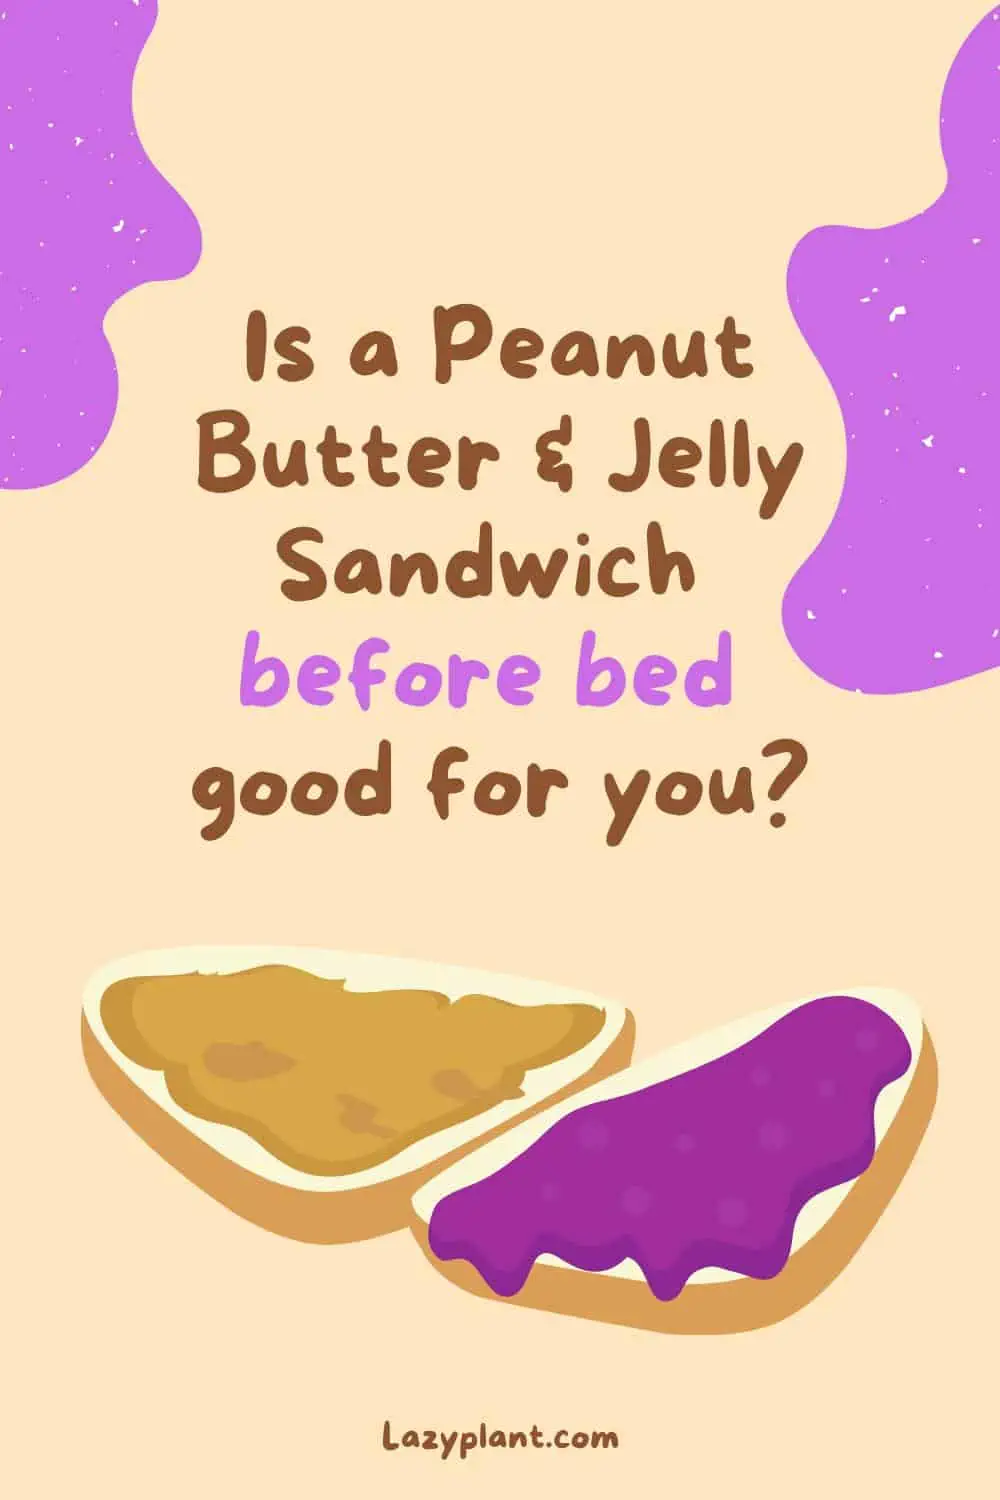 A good night's sleep and weight loss can be aided by consuming a peanut butter and jelly sandwich a few hours before bed, but make sure to use sugar-free, high-quality jelly, and whole wheat bread.